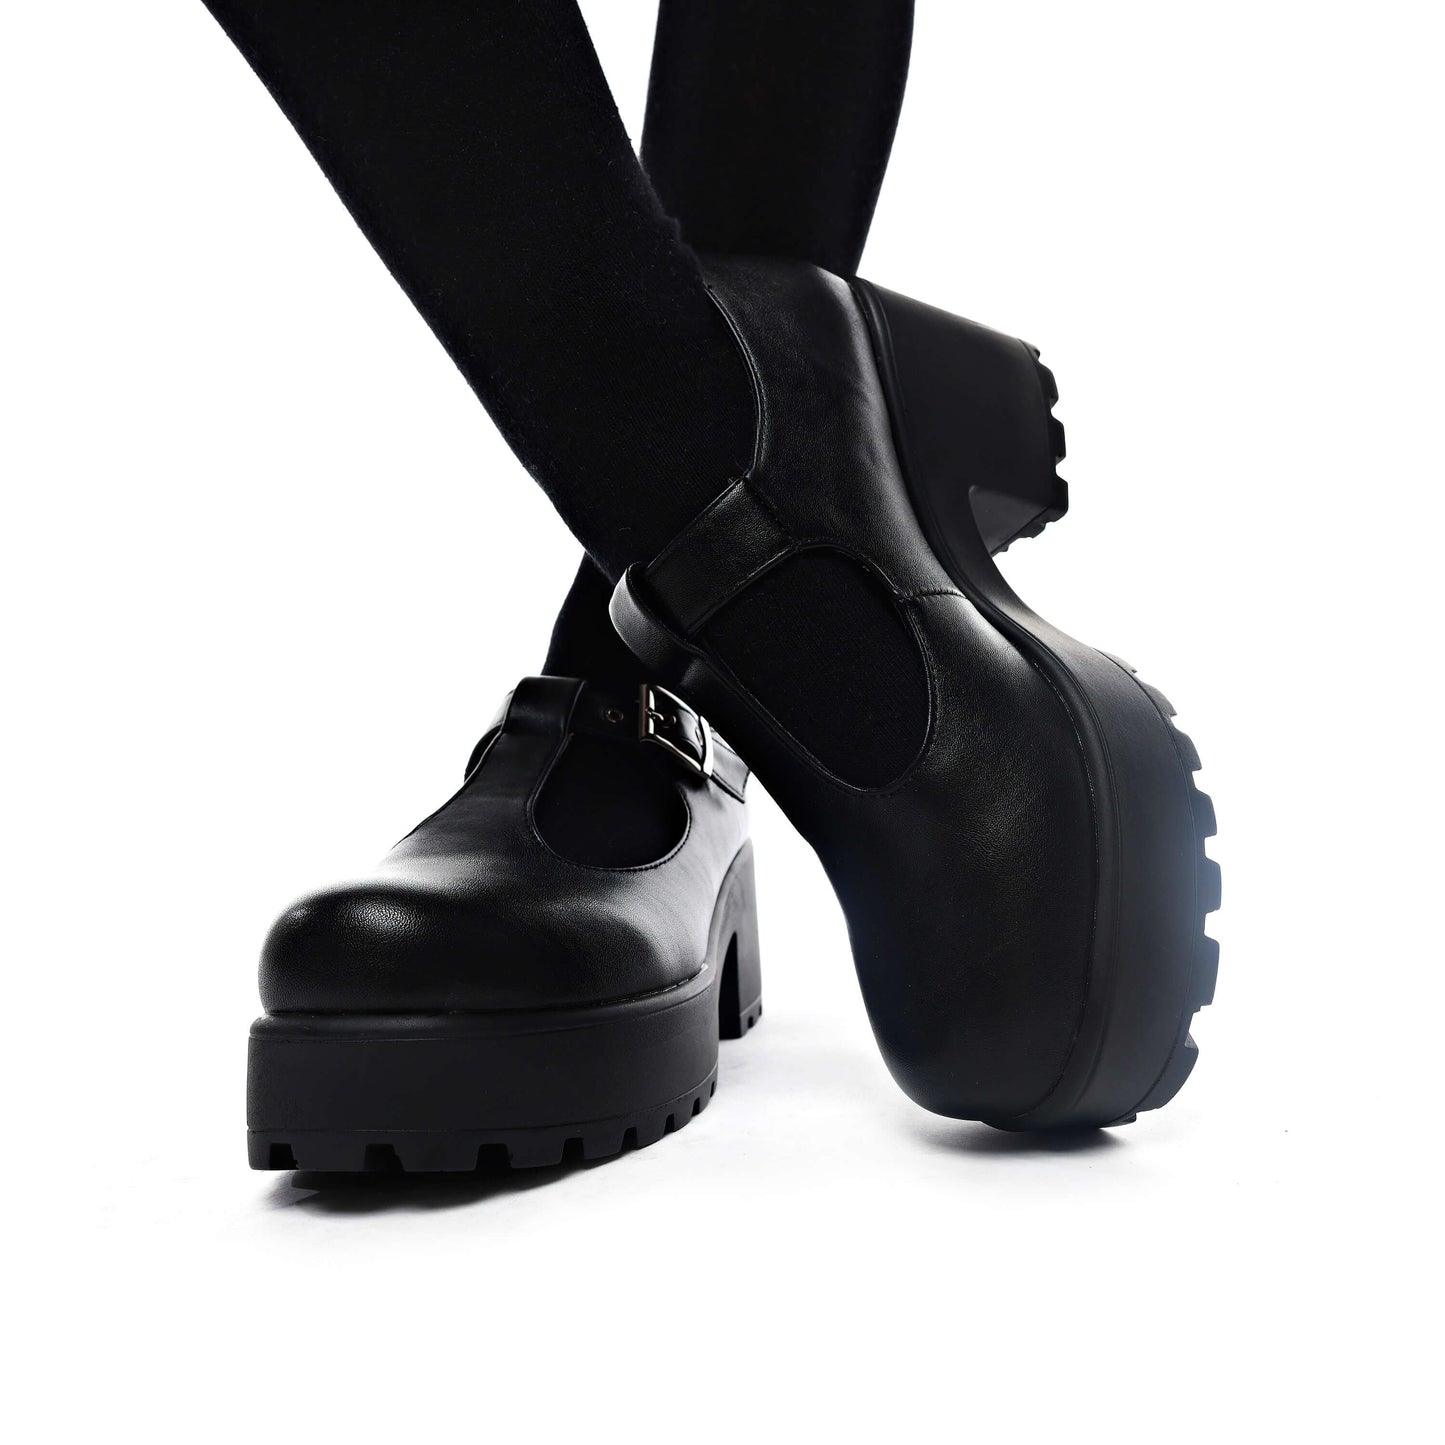 SAI Black Mary Jane Shoes 'Faux Leather Edition' - Mary Janes - KOI Footwear - Black - Model Front View